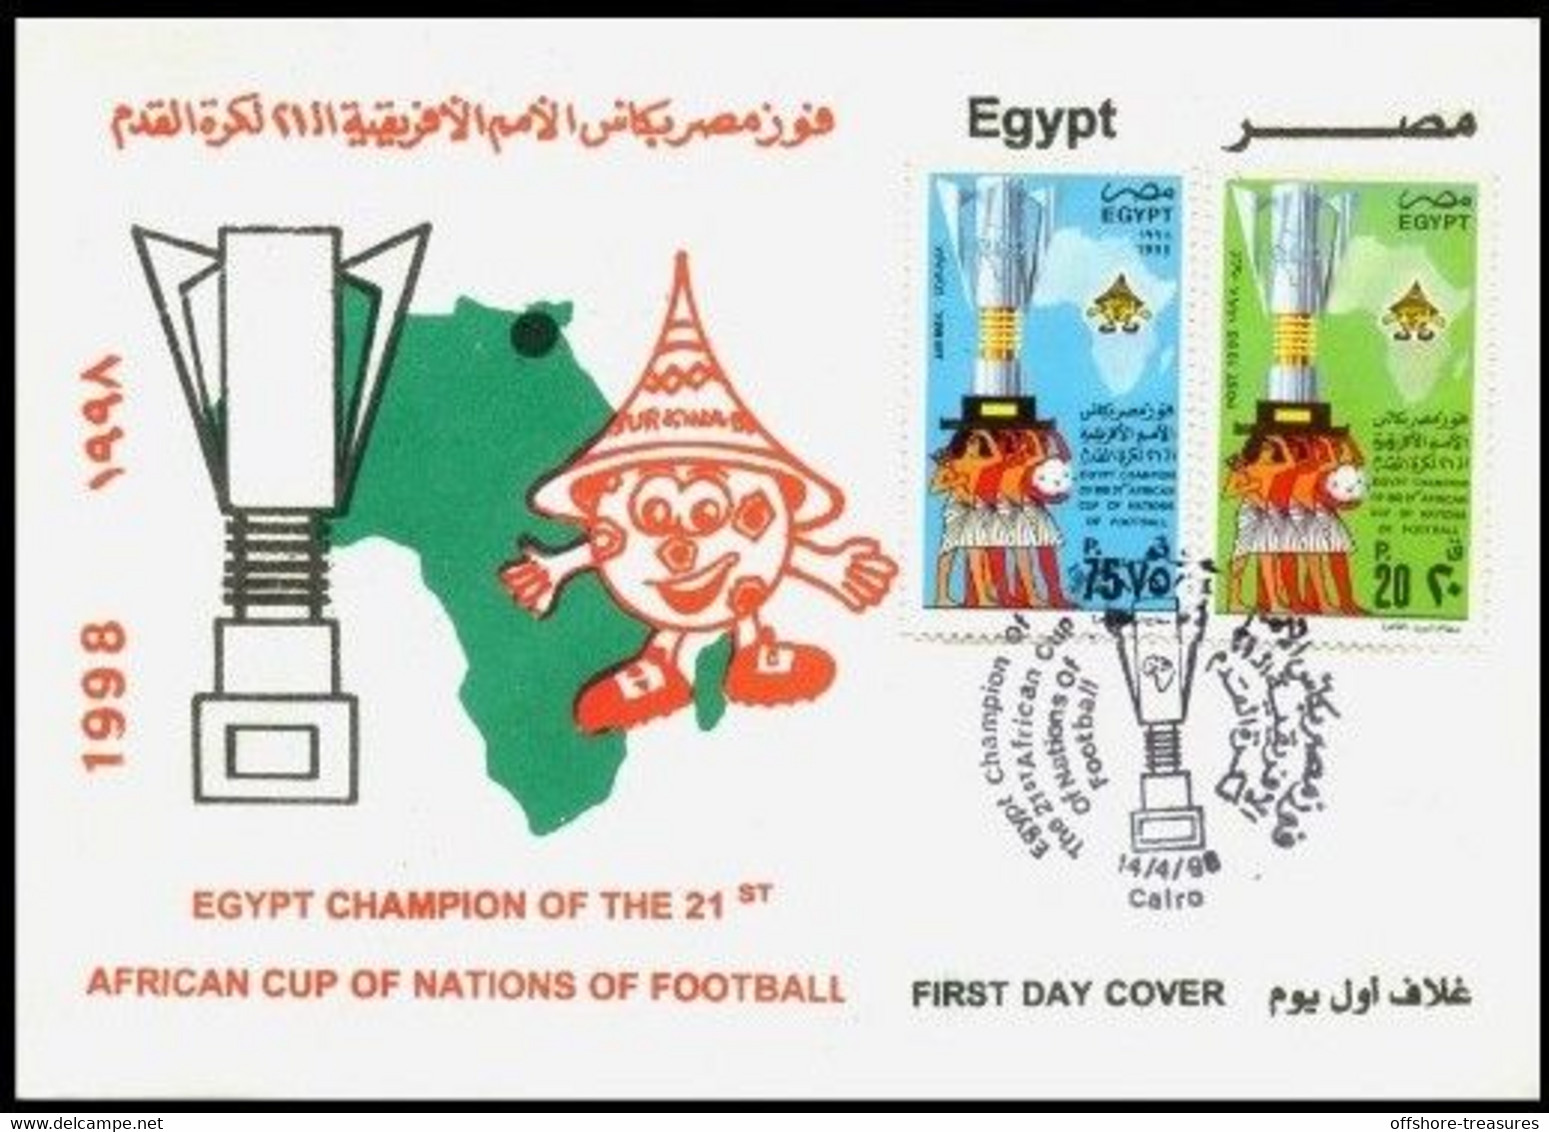 Egypt FOOTBALL WINNER 1998 First Day Cover - FDC 2 Stamps 75P & 20P AFRICAN NATIONS CUP BURKINA FASO - Brieven En Documenten